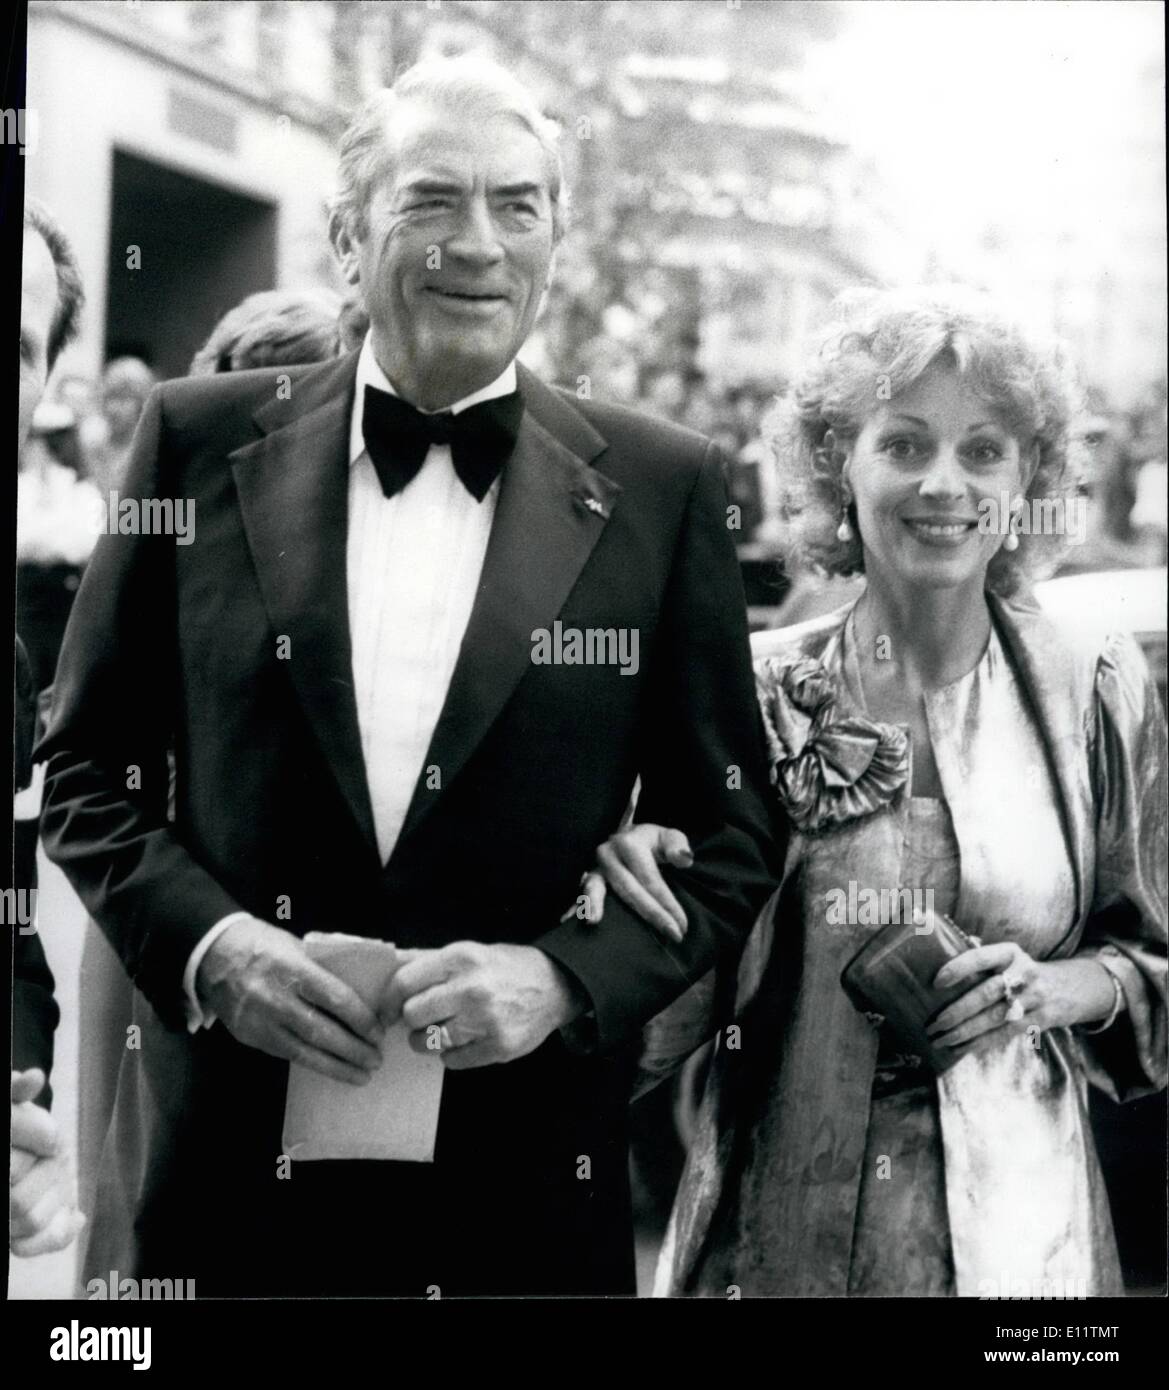 Jul. 07, 1980 - ''The sea wolf'' Premiere at the Liecester Square Theatre.: The Royal Premiere of the film ''The Sea Wolf'' staring Gregory Peck, Roger Moore, Barbara Kellerman, was held in the presents of the Duke and Duches of Kent last night. Photo shows Gregory Peck seen arriving with his wife for the premiere. Stock Photo